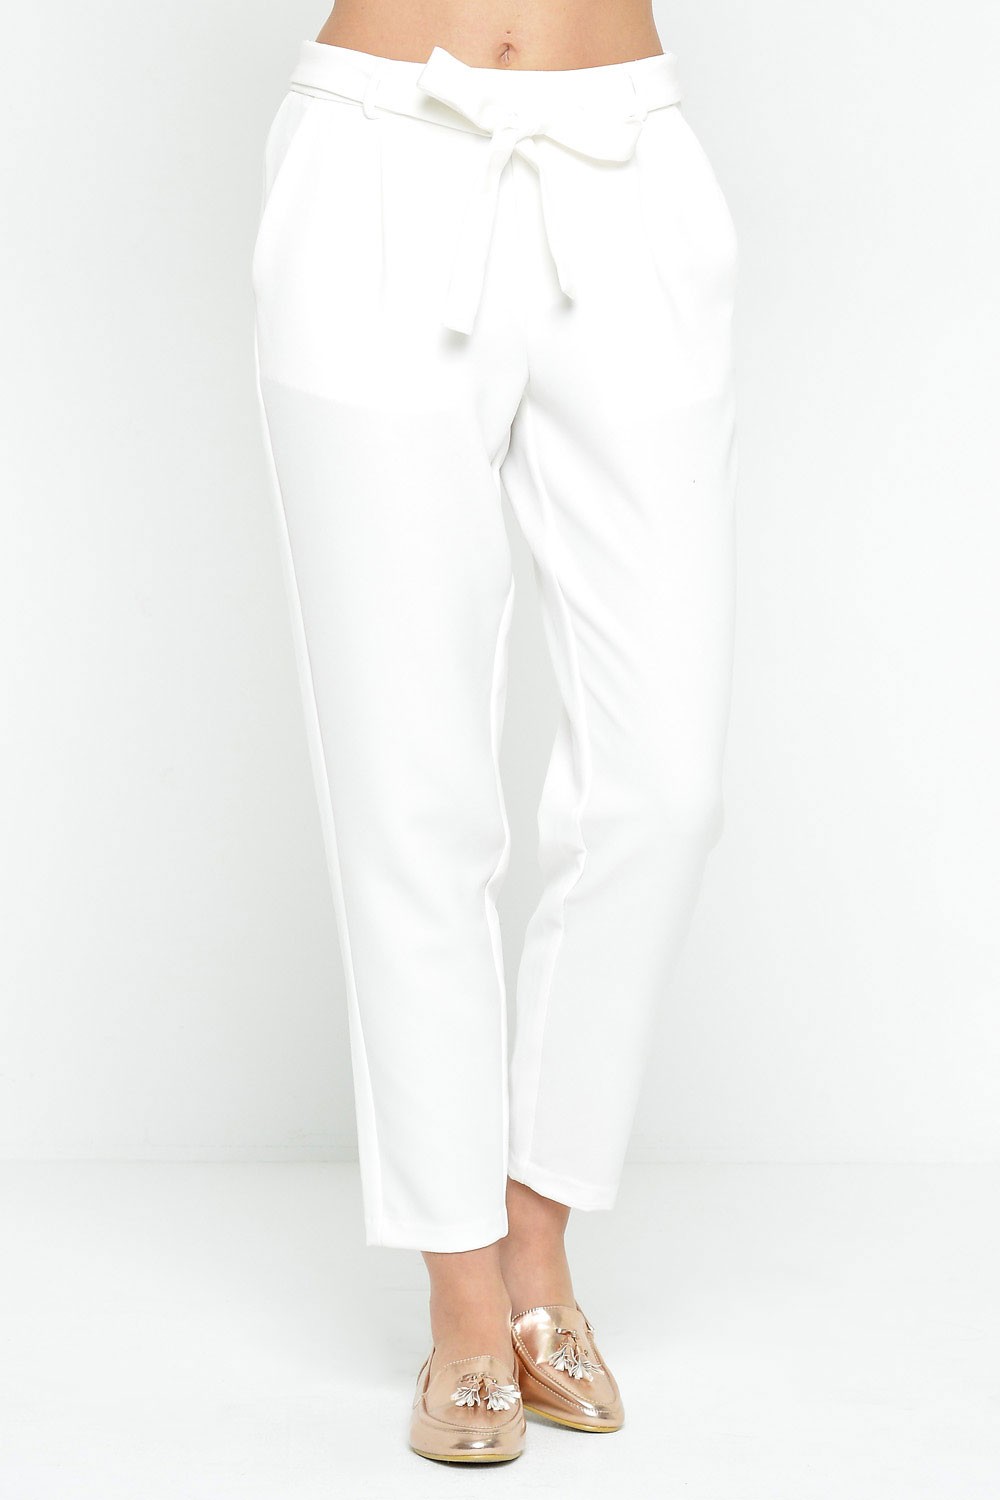 Vero Moda Mags Ankle Pants in White | iCLOTHING